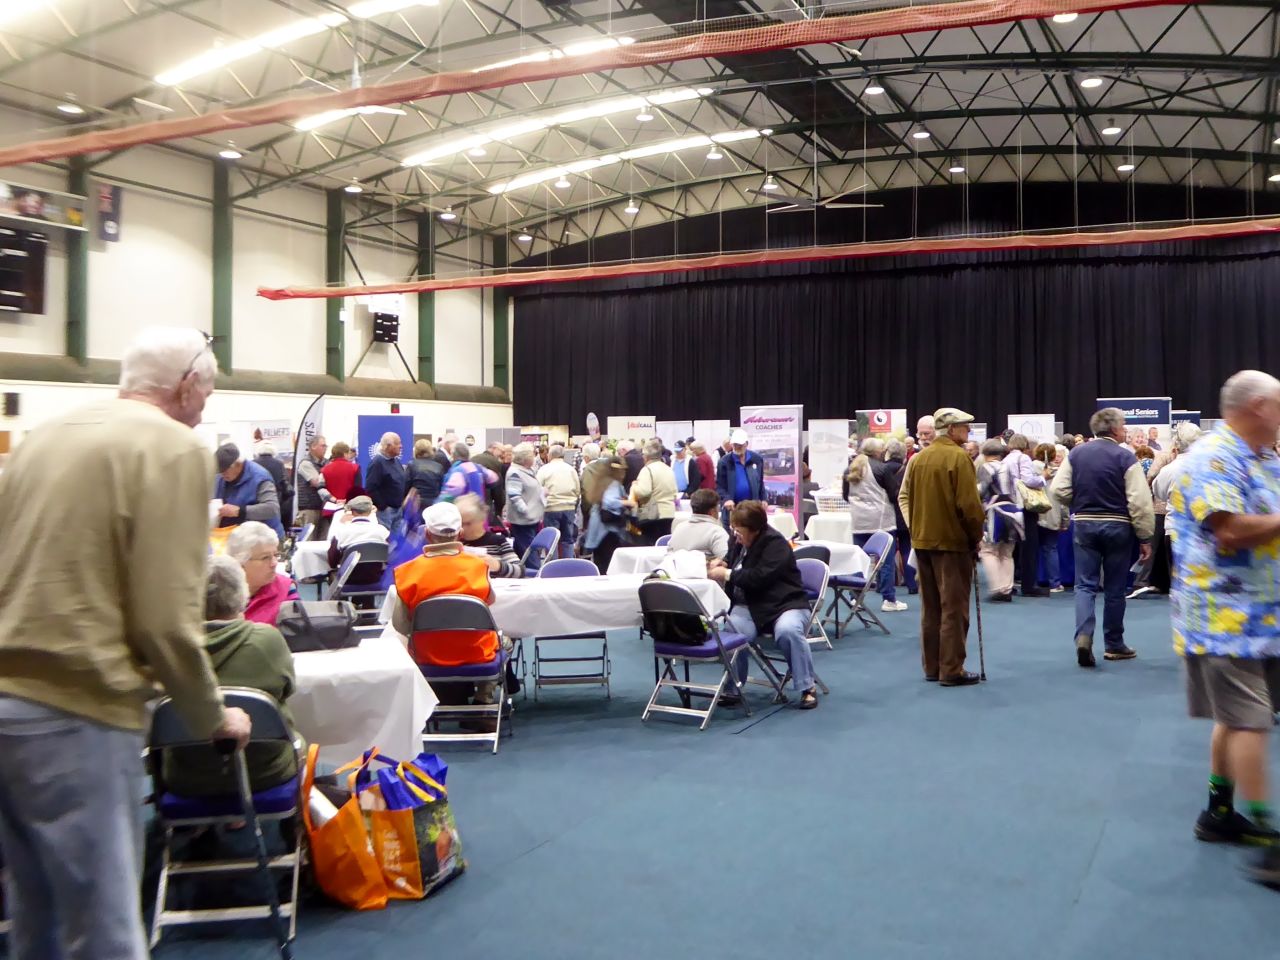 2,000 visitors viewed the 108 stalls at the Seniors Expo on August 22, 2019 in the Clive Berghofer Recreation Centre, Toowoomba.